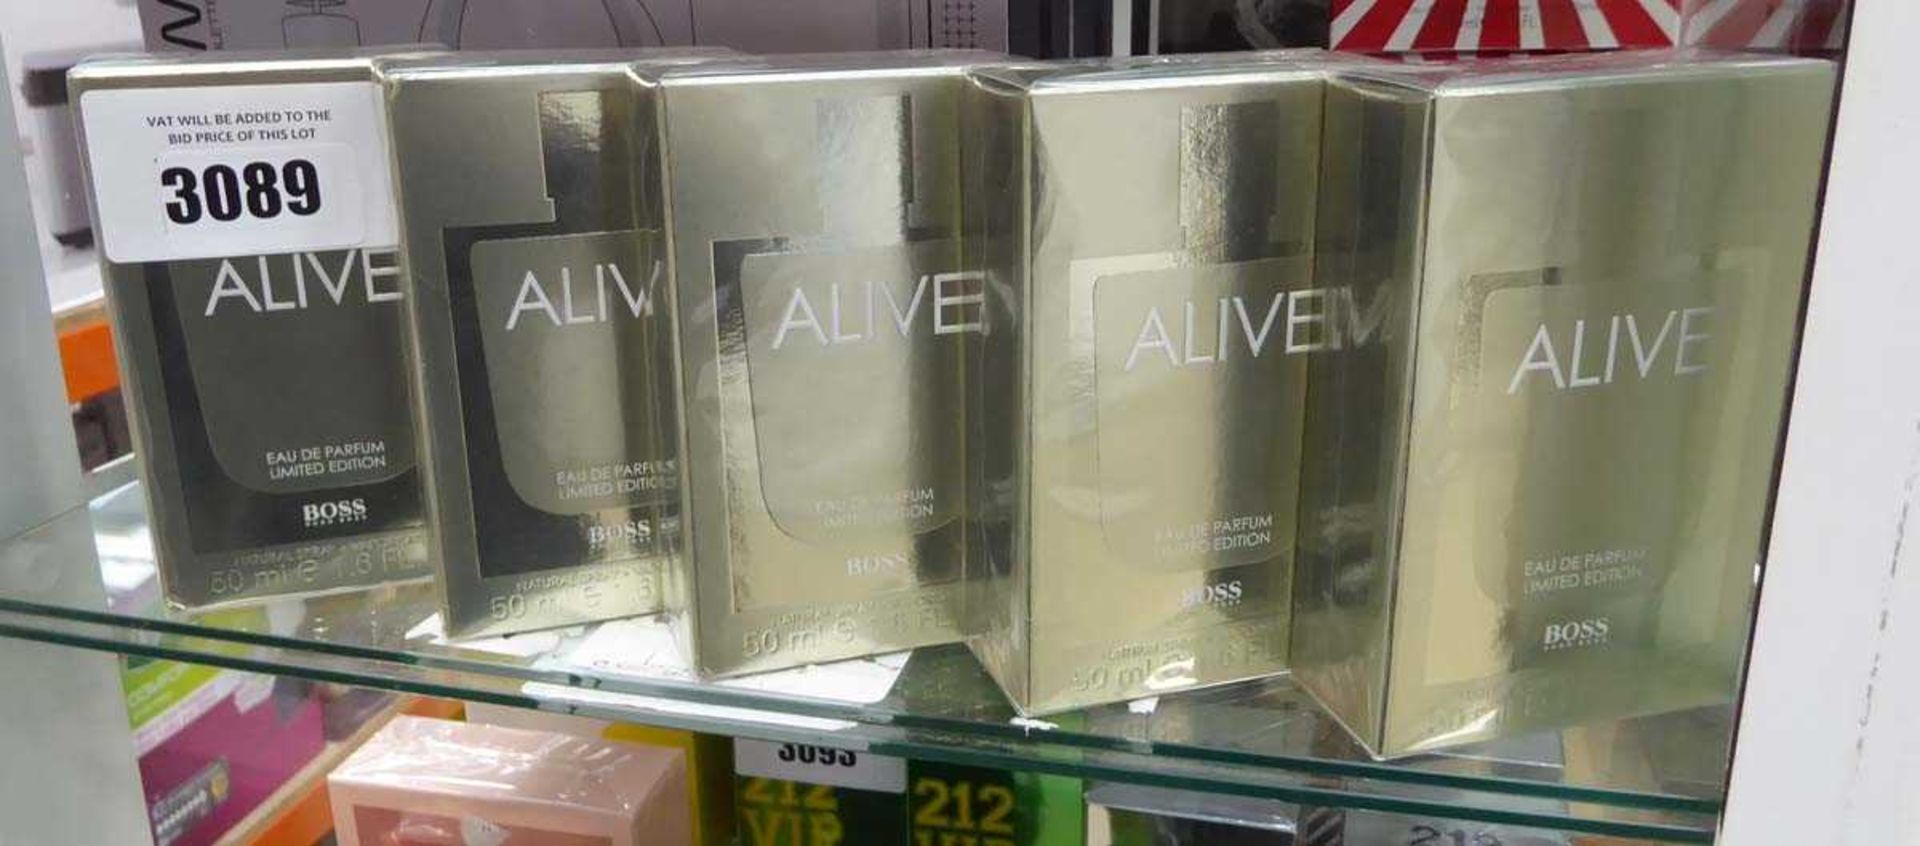 +VAT 5 Hugo Boss Alive Limited Edition perfumes (all sealed)